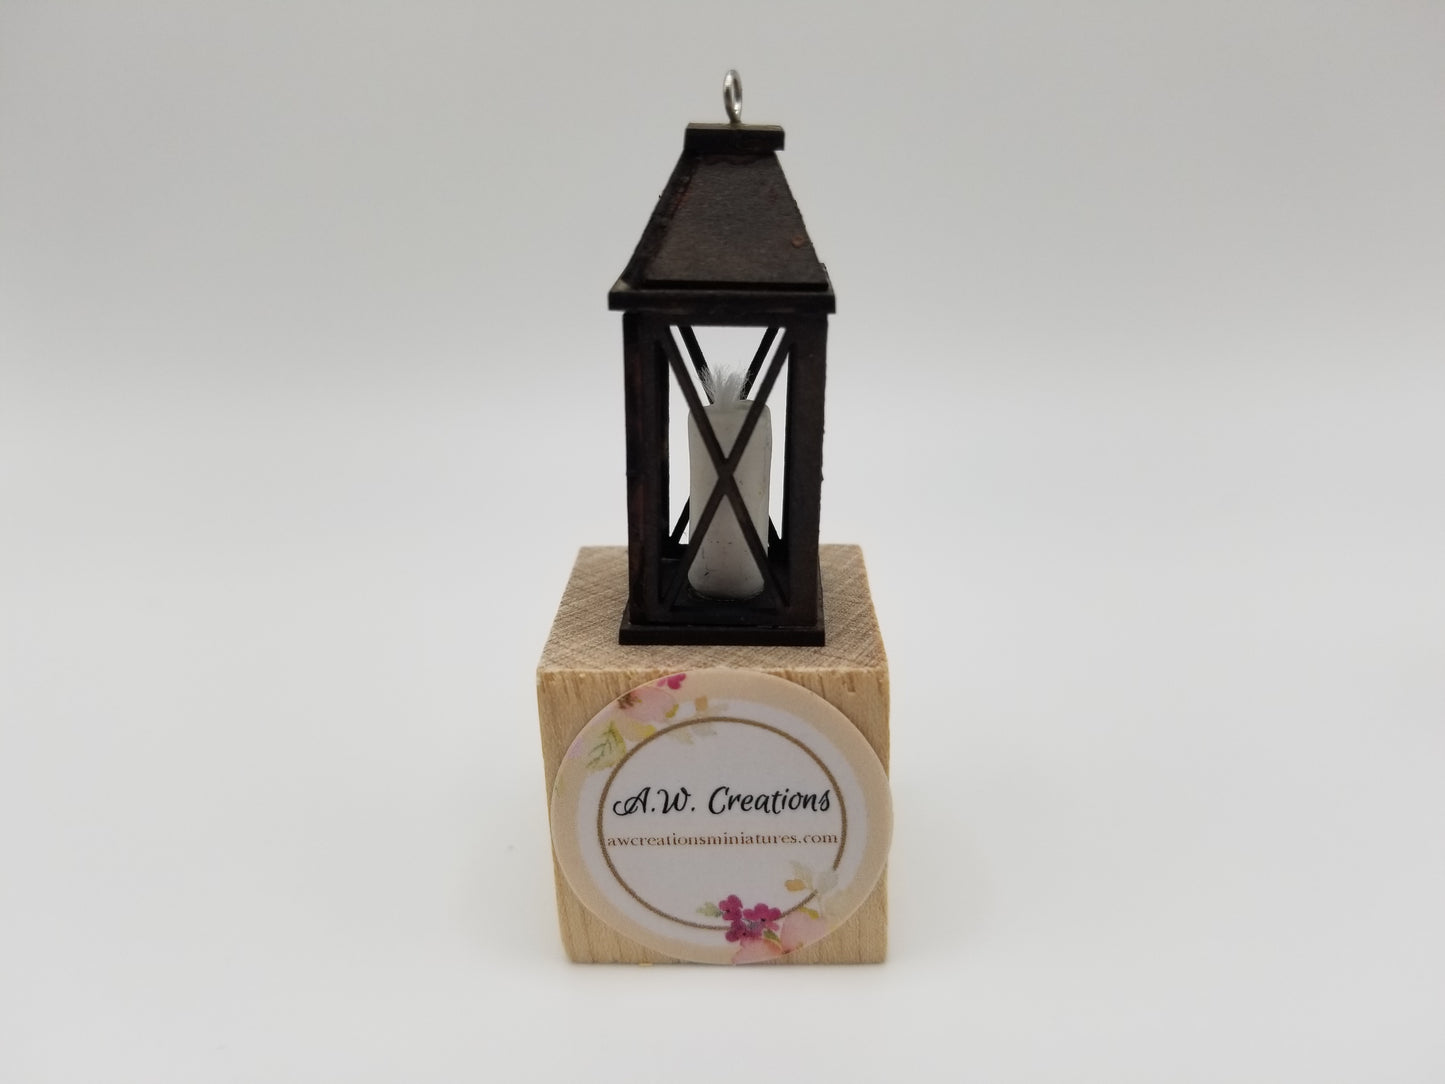 Black Lantern with white candle